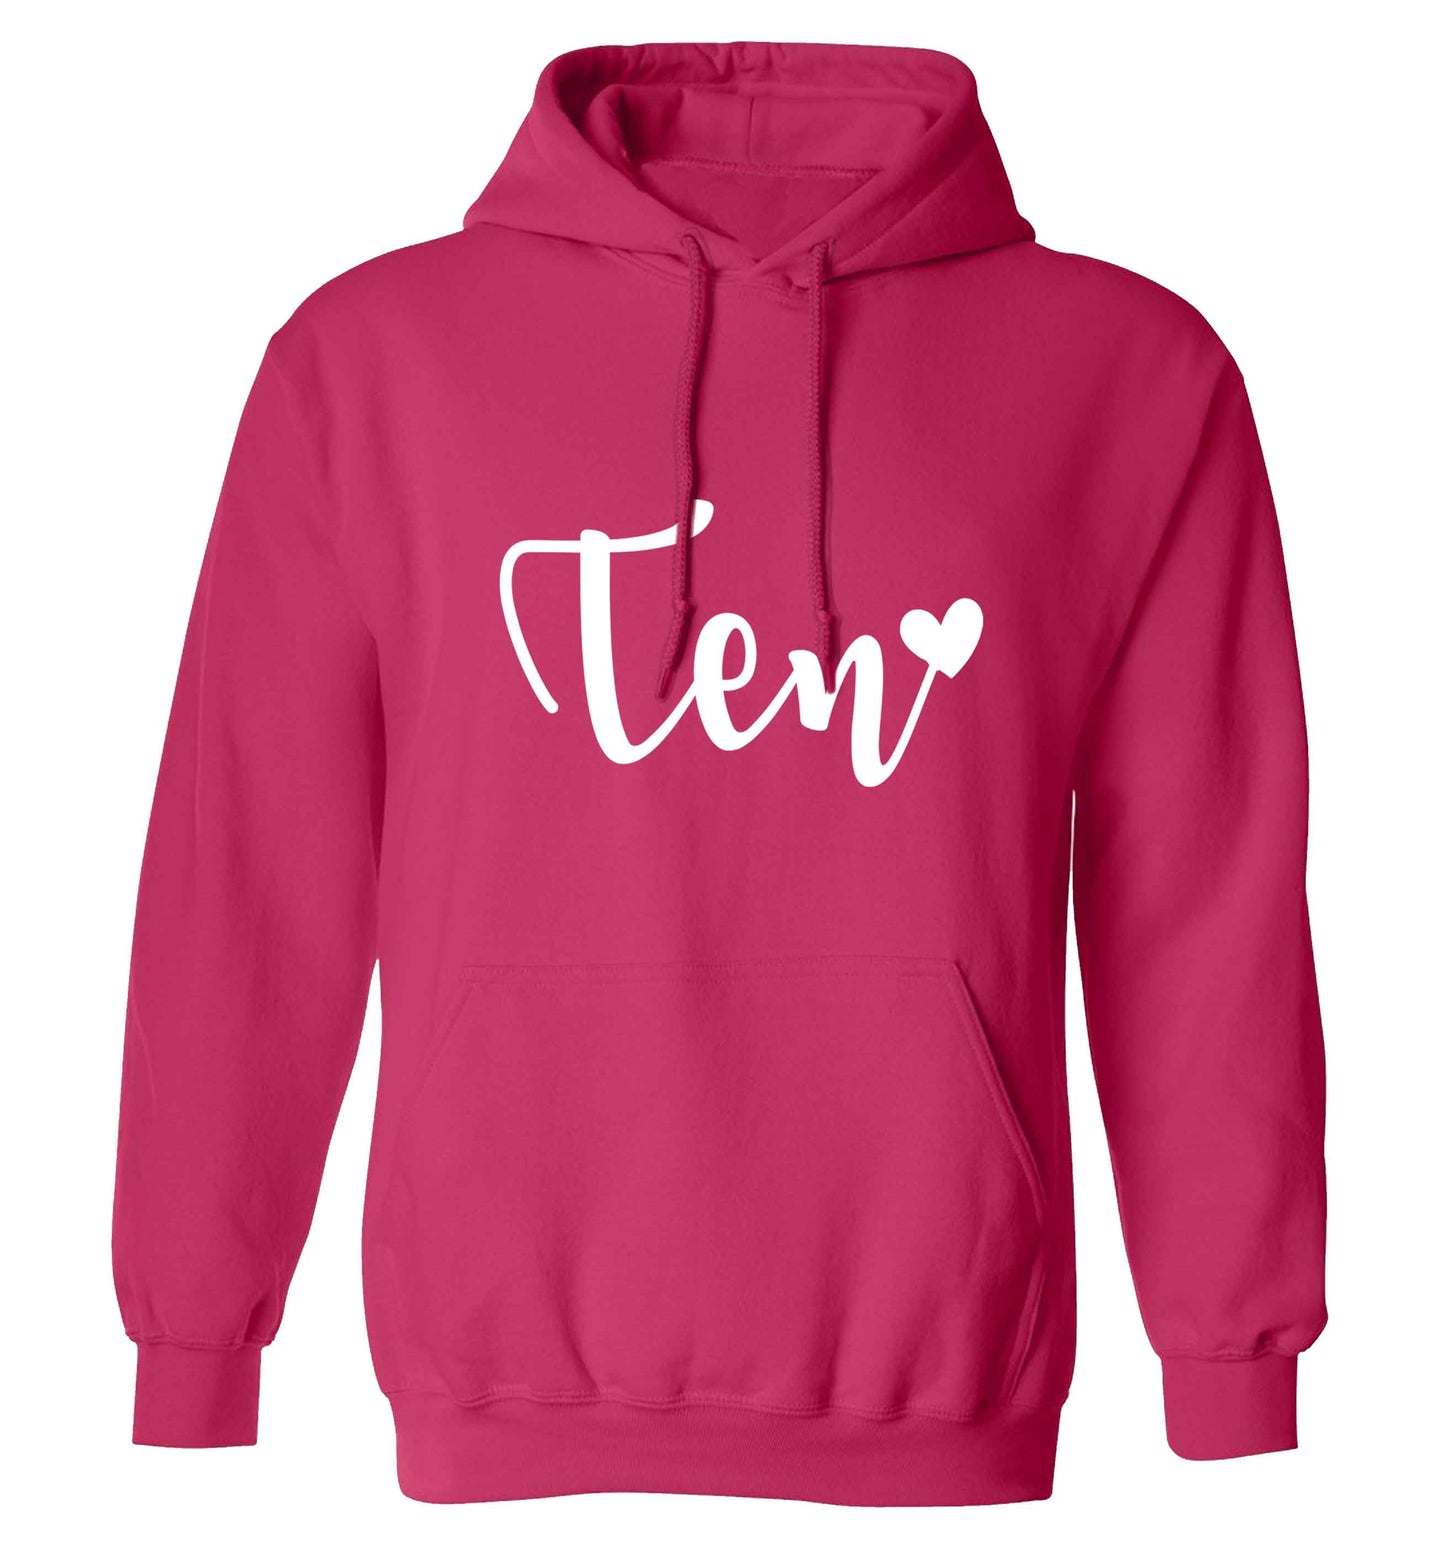 Rose gold eleven adults unisex pink hoodie 2XL